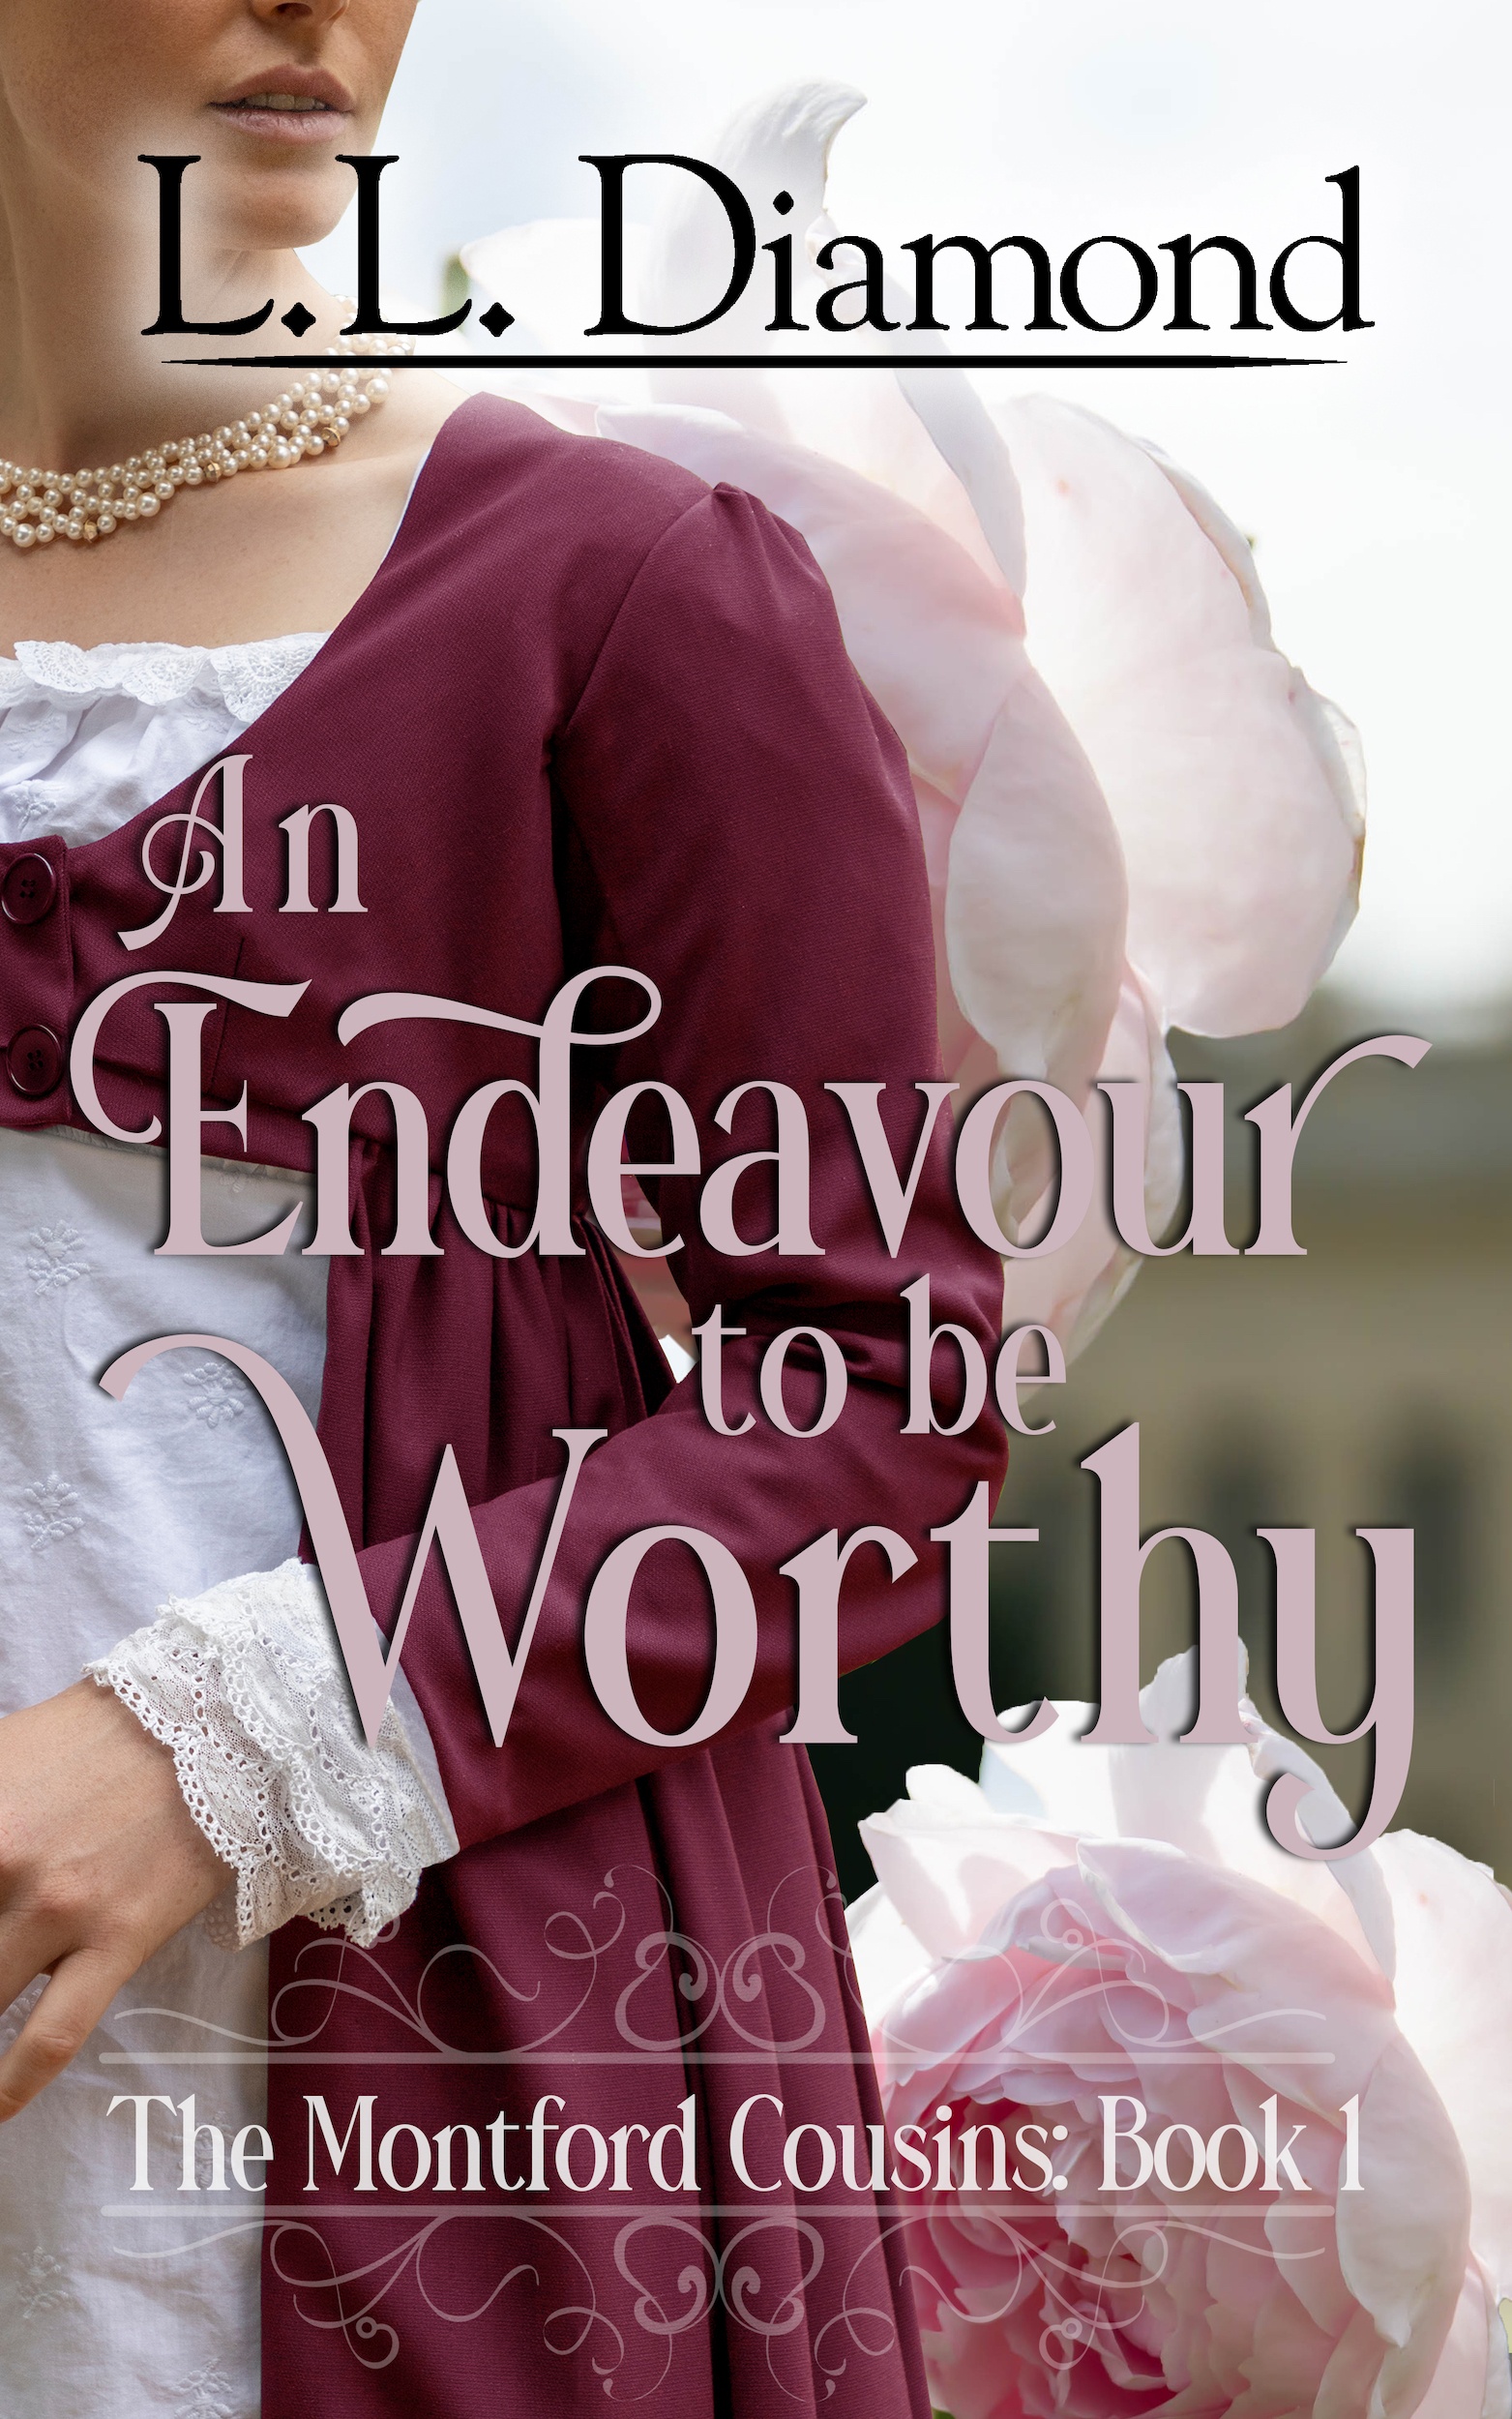 An Endeavour to be Worthy - Chapter 1 and Cover Reveal pic